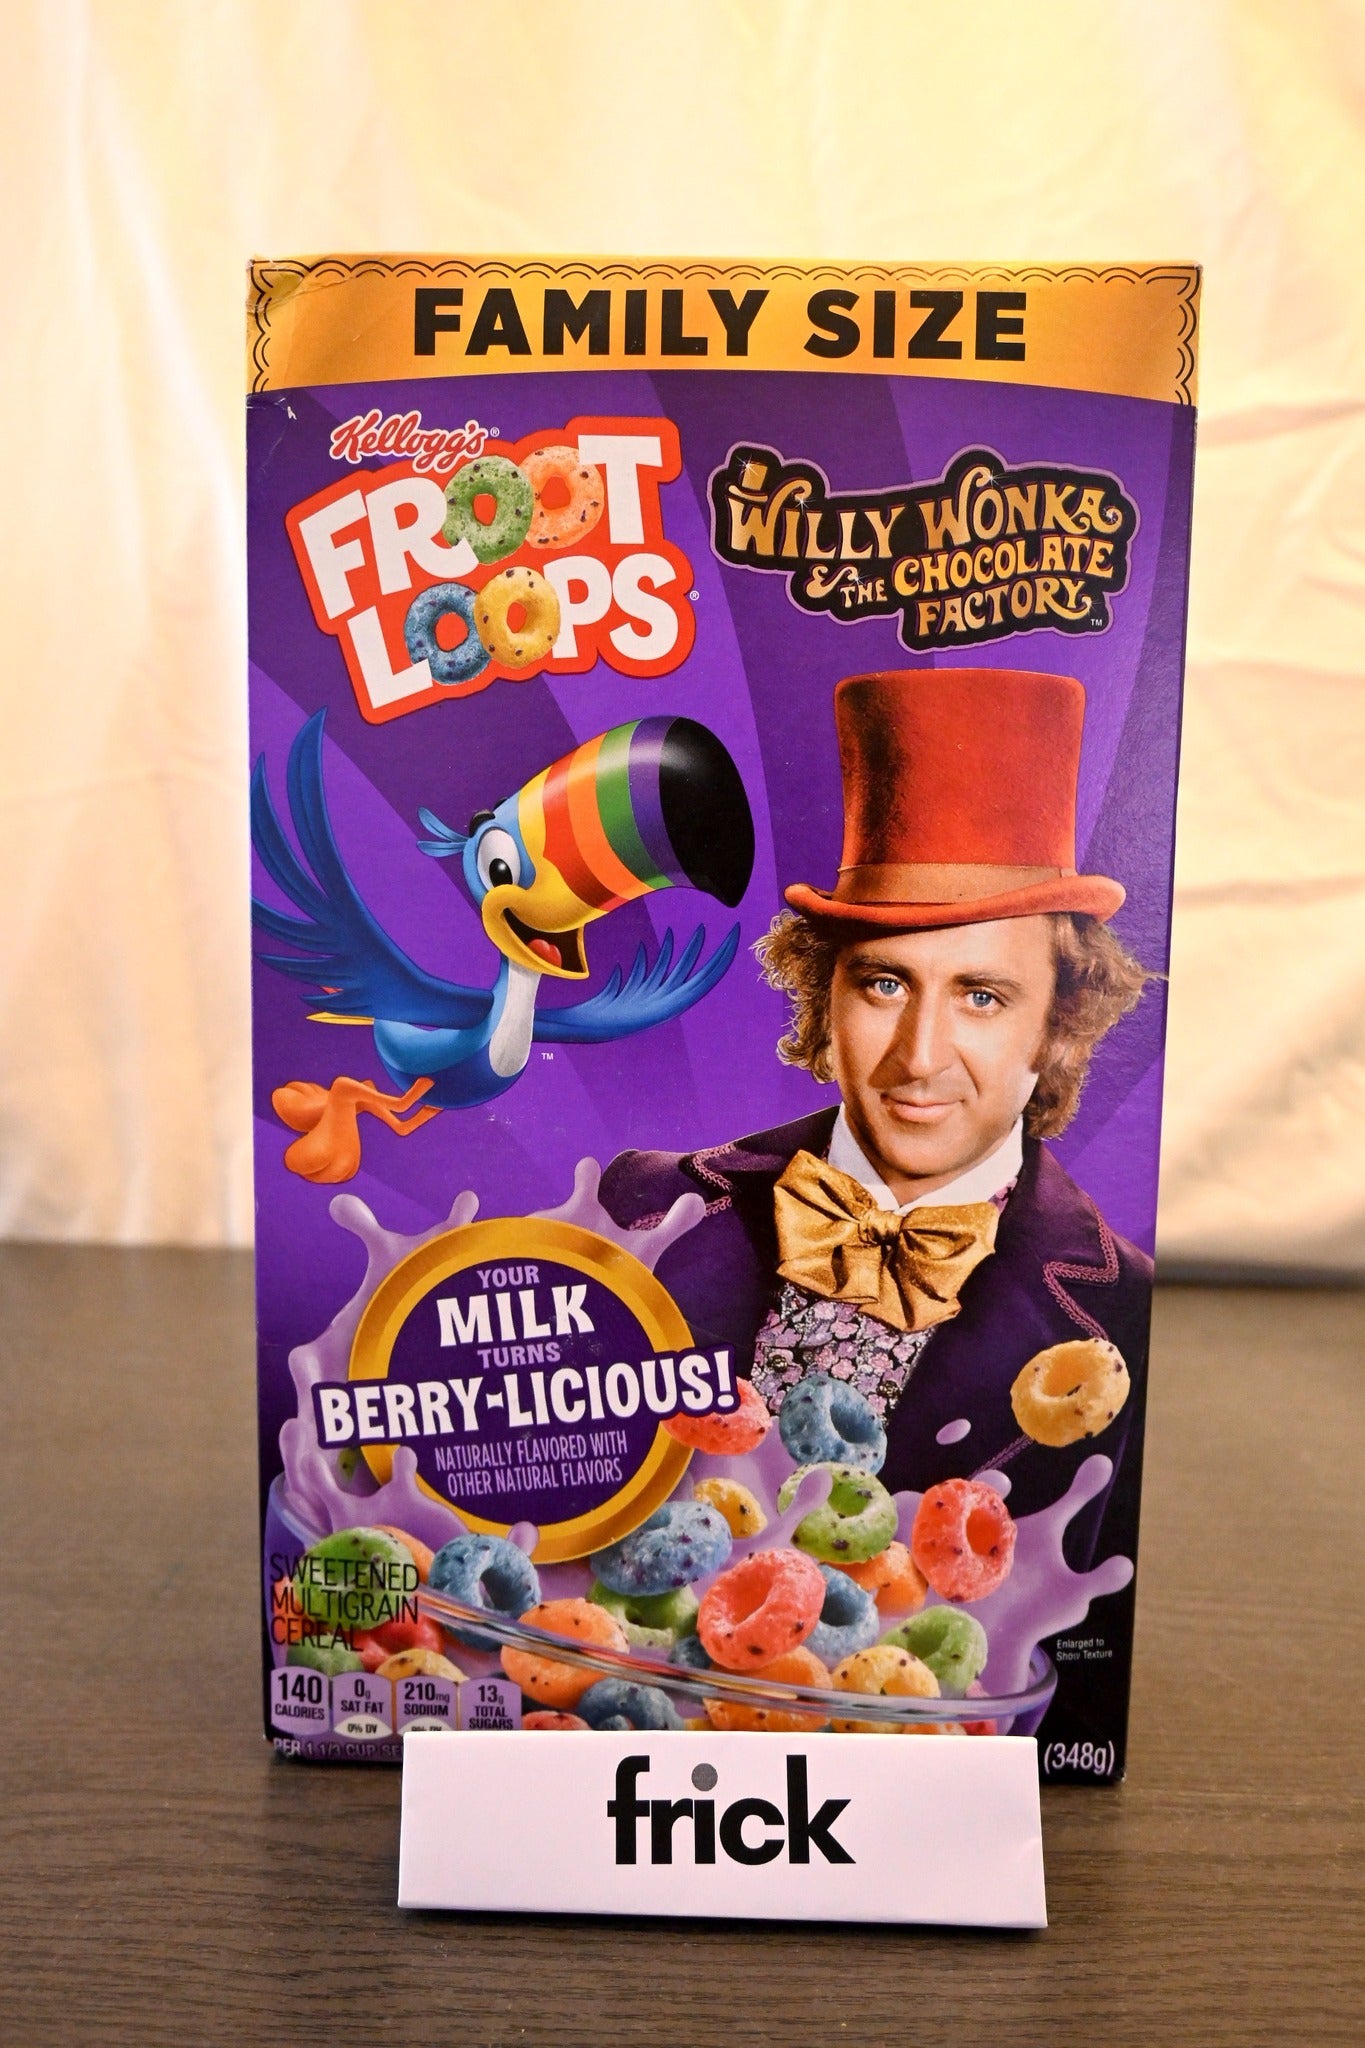 CEREAL FROOT LOOPS WILLI WONKA FAMILI SIZE